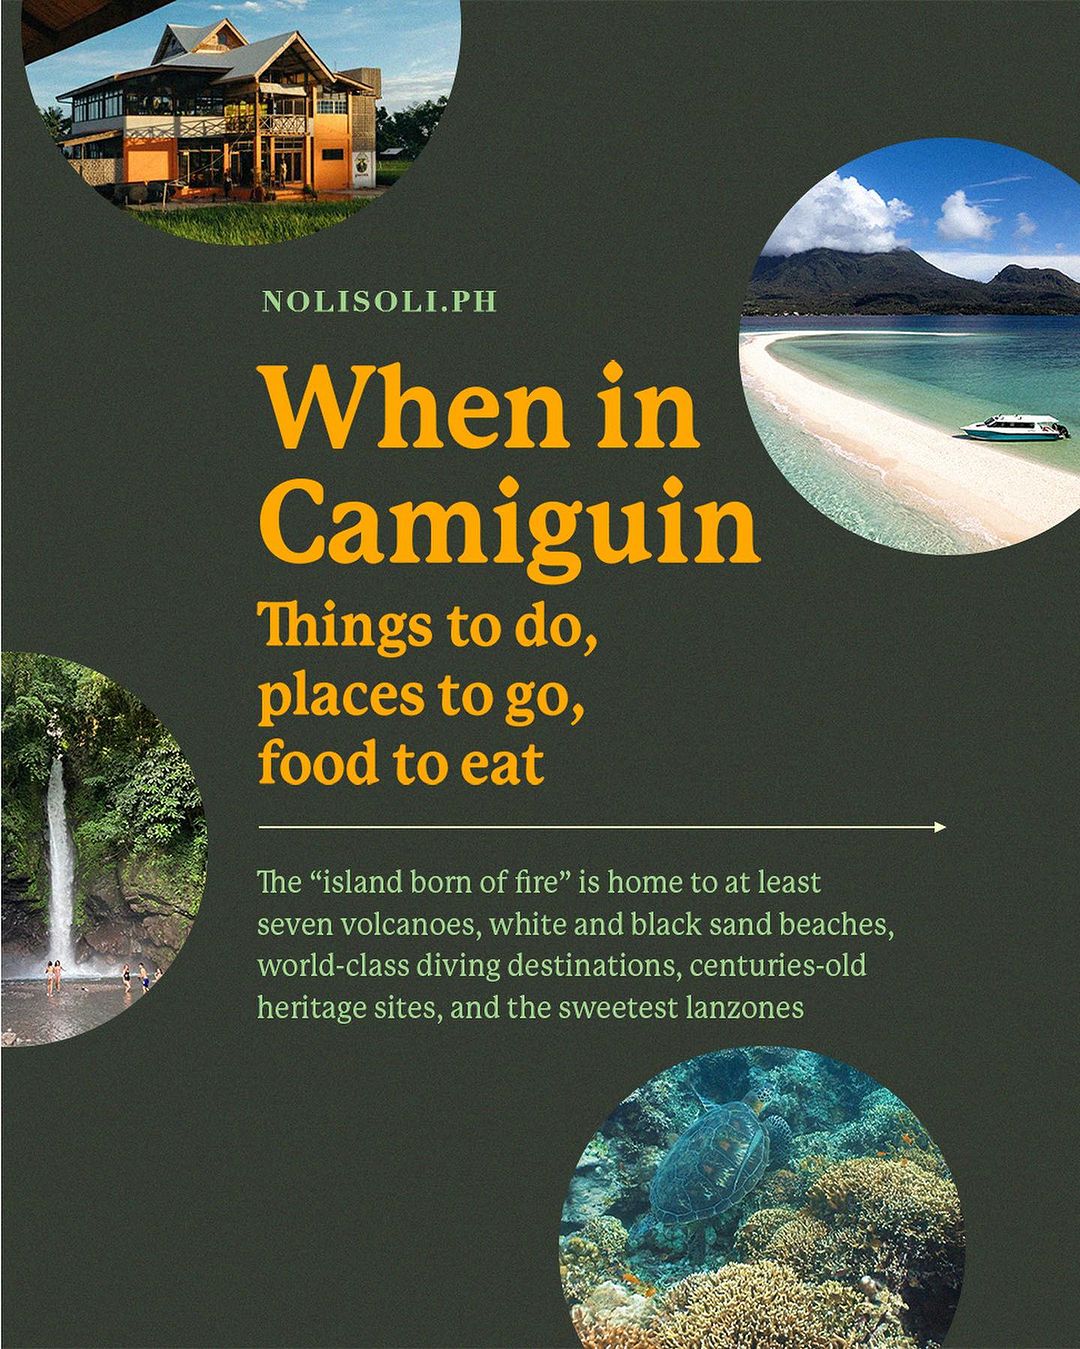 You only need 48 hours to fully experience Camiguin